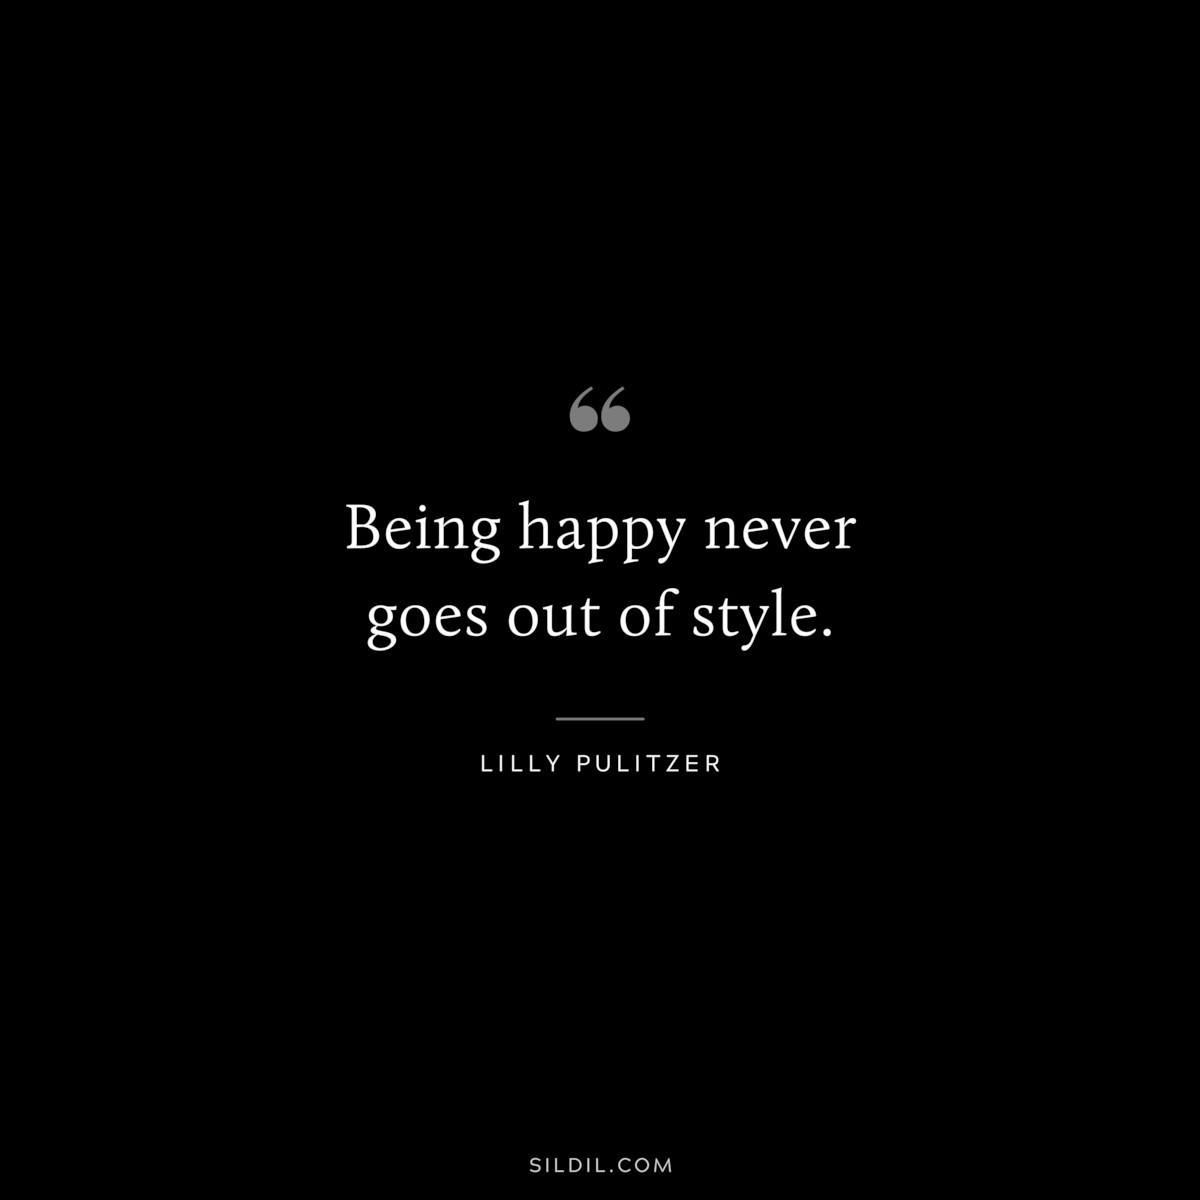 Being happy never goes out of style. ― Lilly Pulitzer